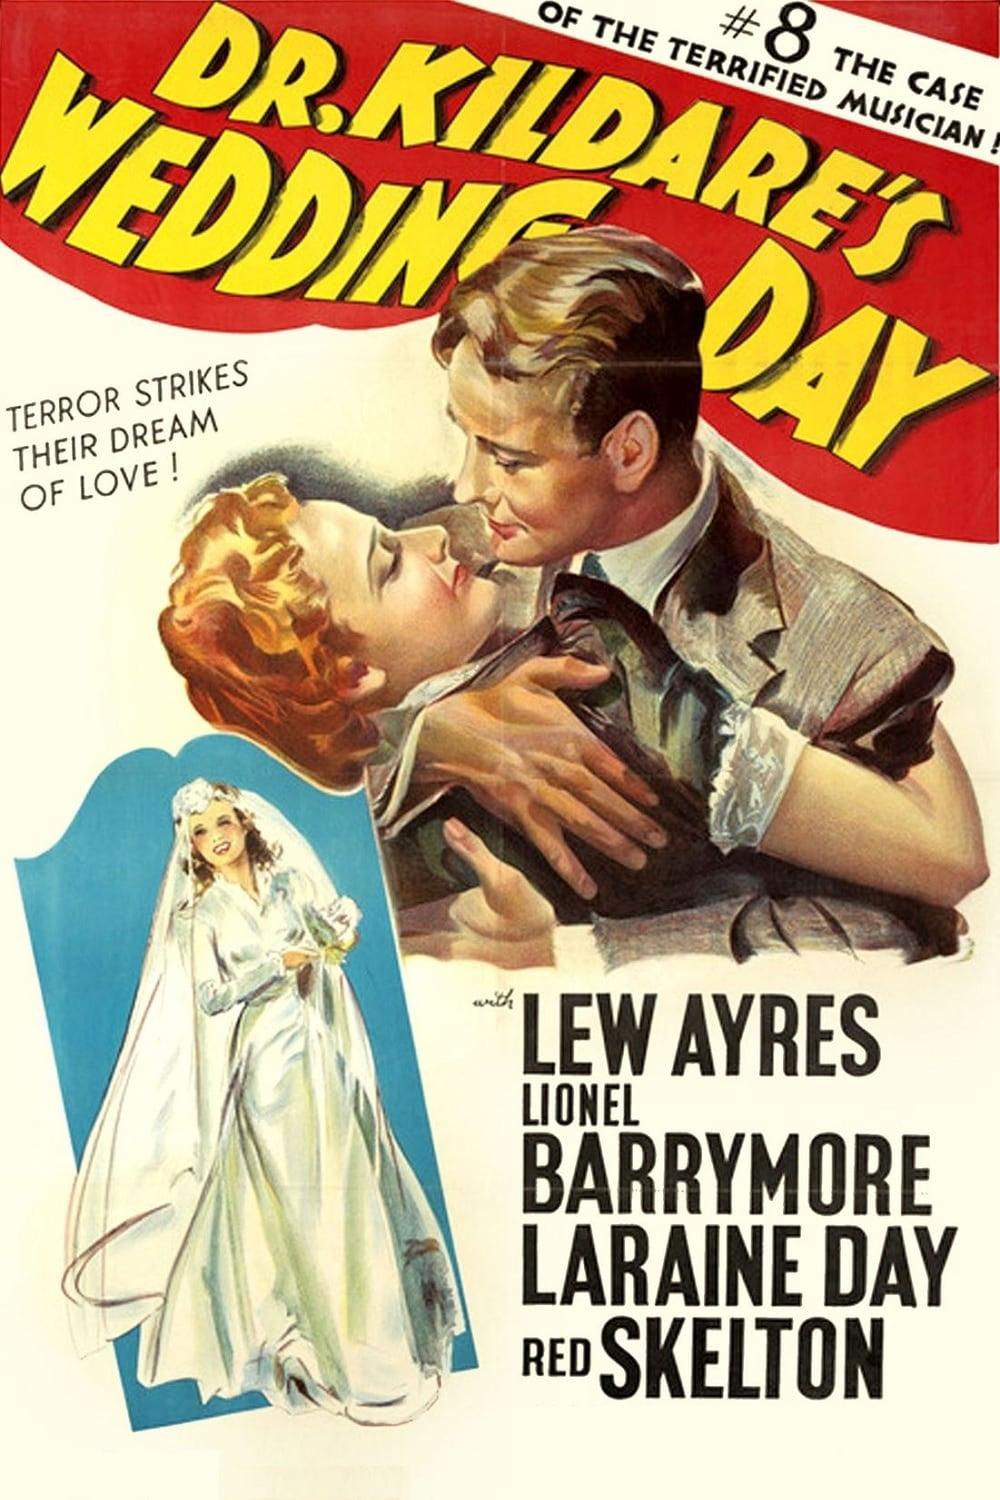 Dr. Kildare's Wedding Day poster